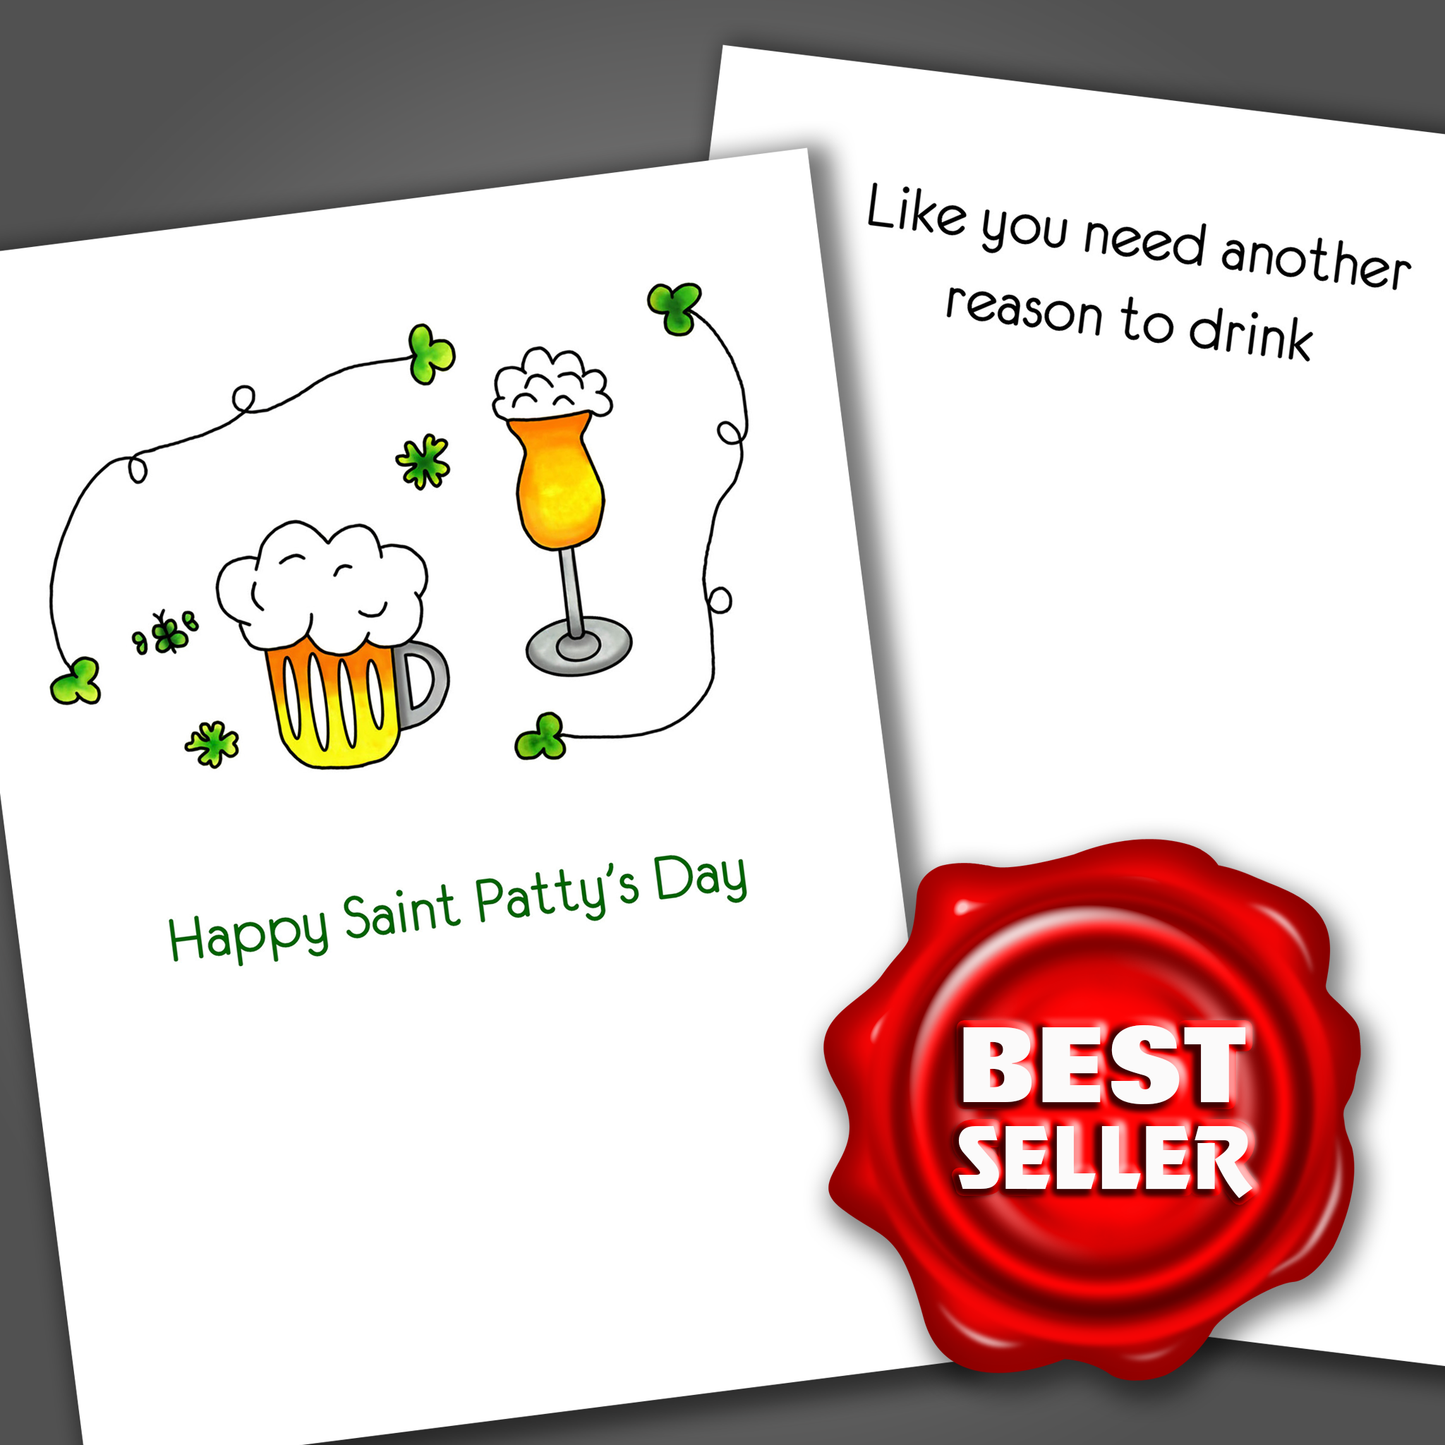 Reason to Drink, Saint Patrick's Day Card